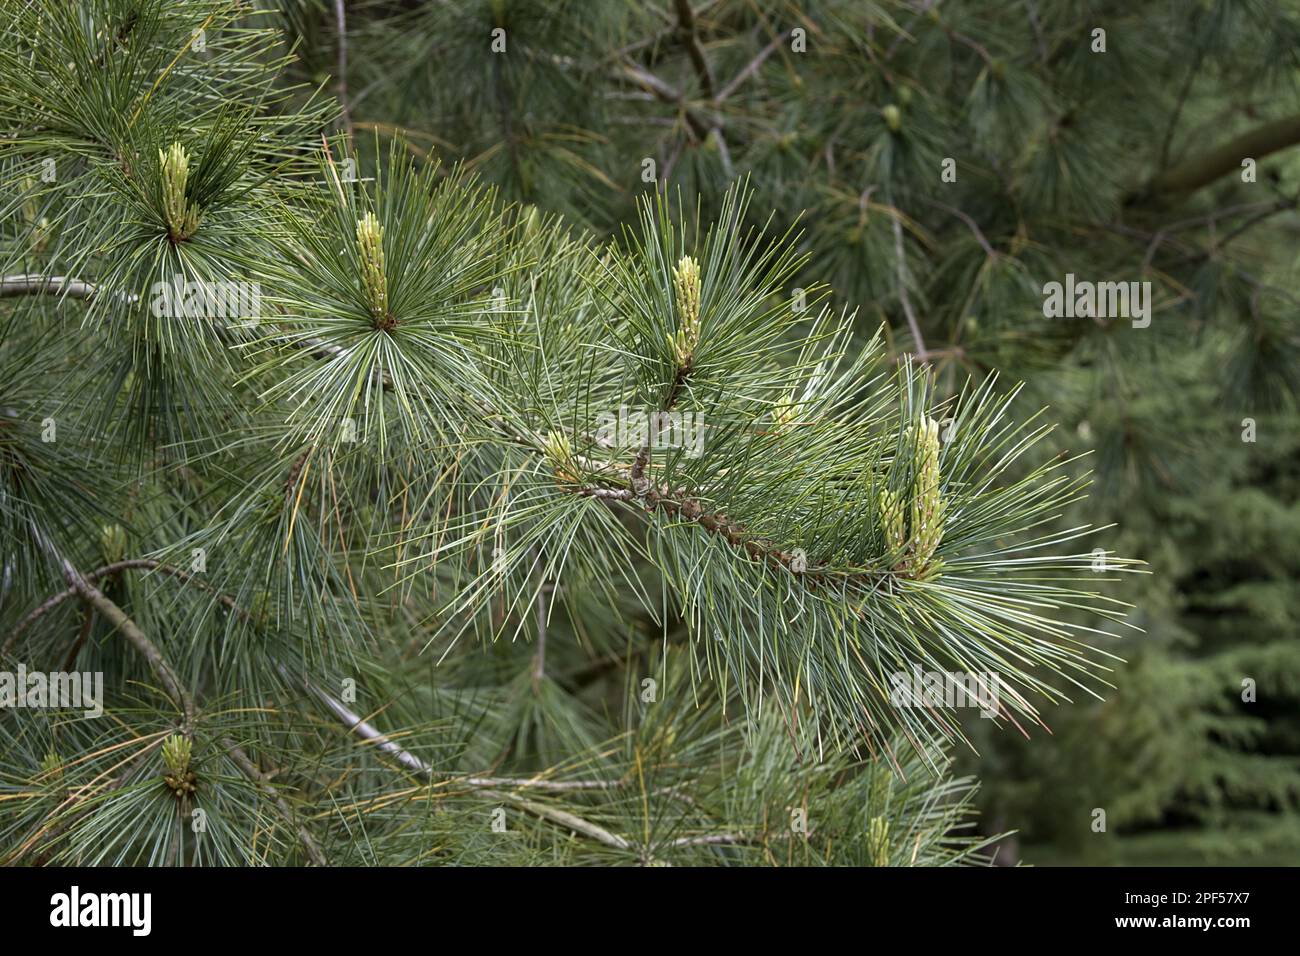 White or Weymouth pine leaf with young shoots Stock Photo